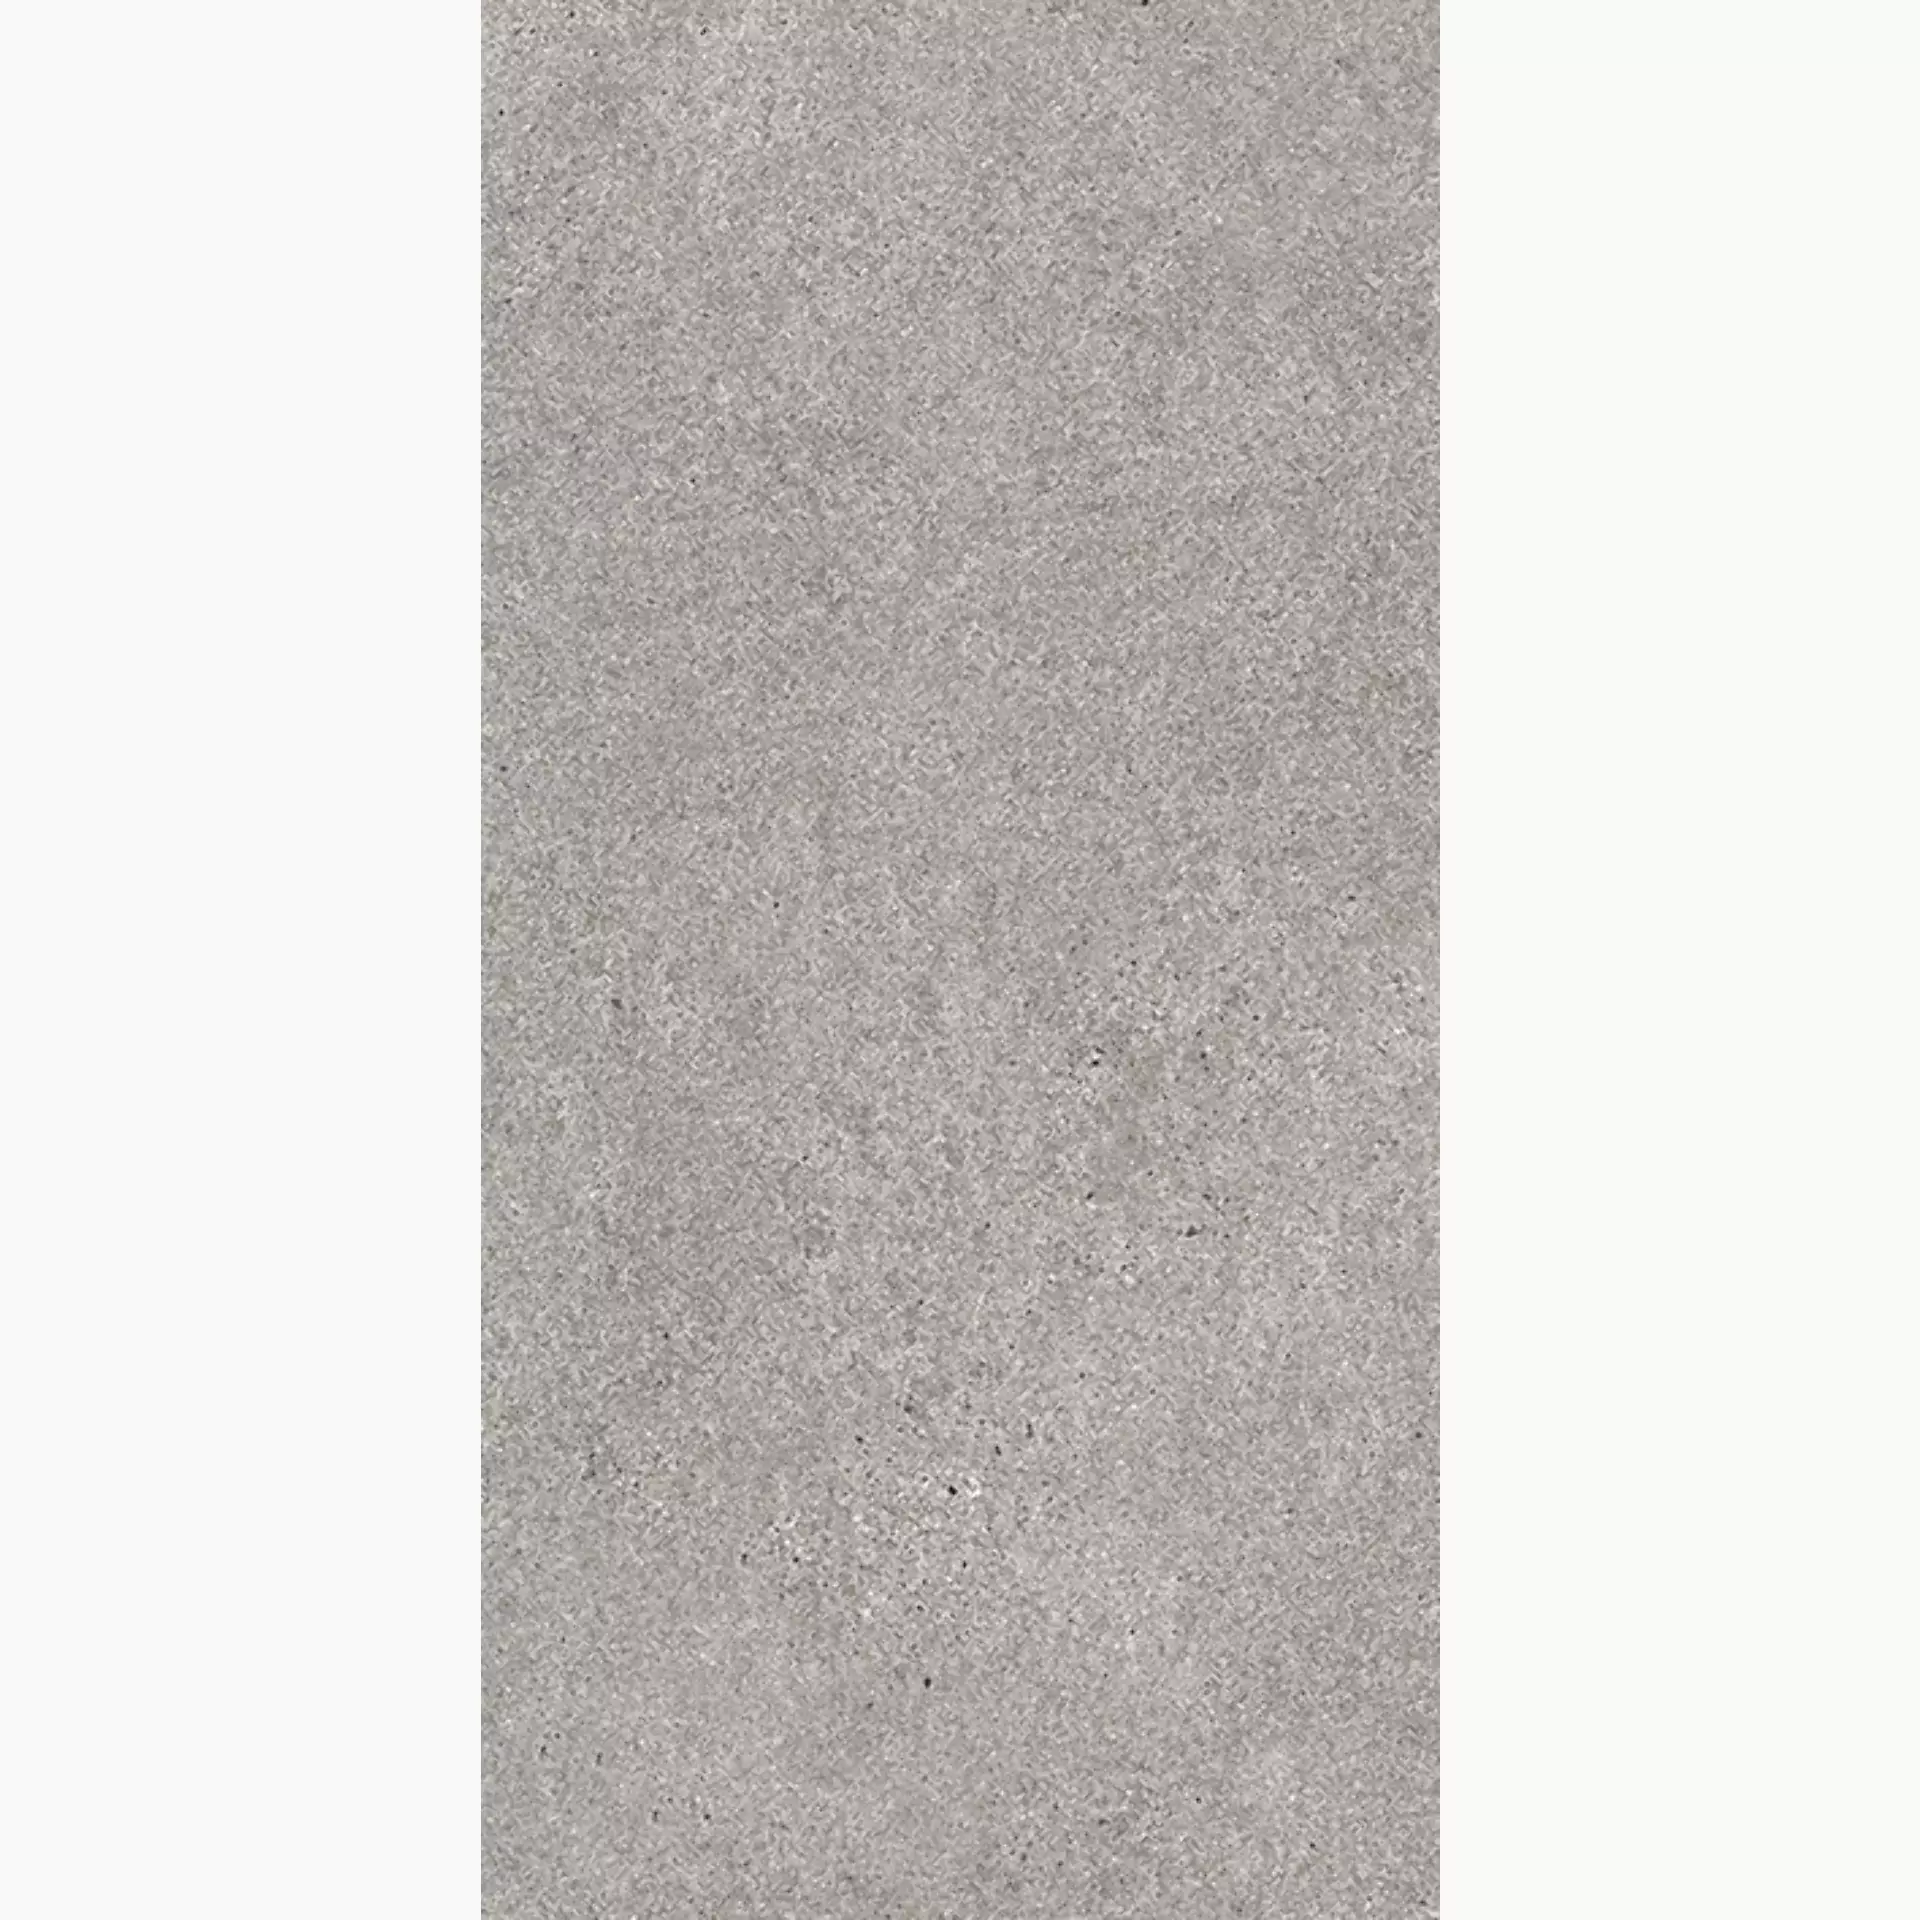 Villeroy & Boch Solid Tones Cool Stone Antislip 2521-PS60 30x60cm rectified 10mm